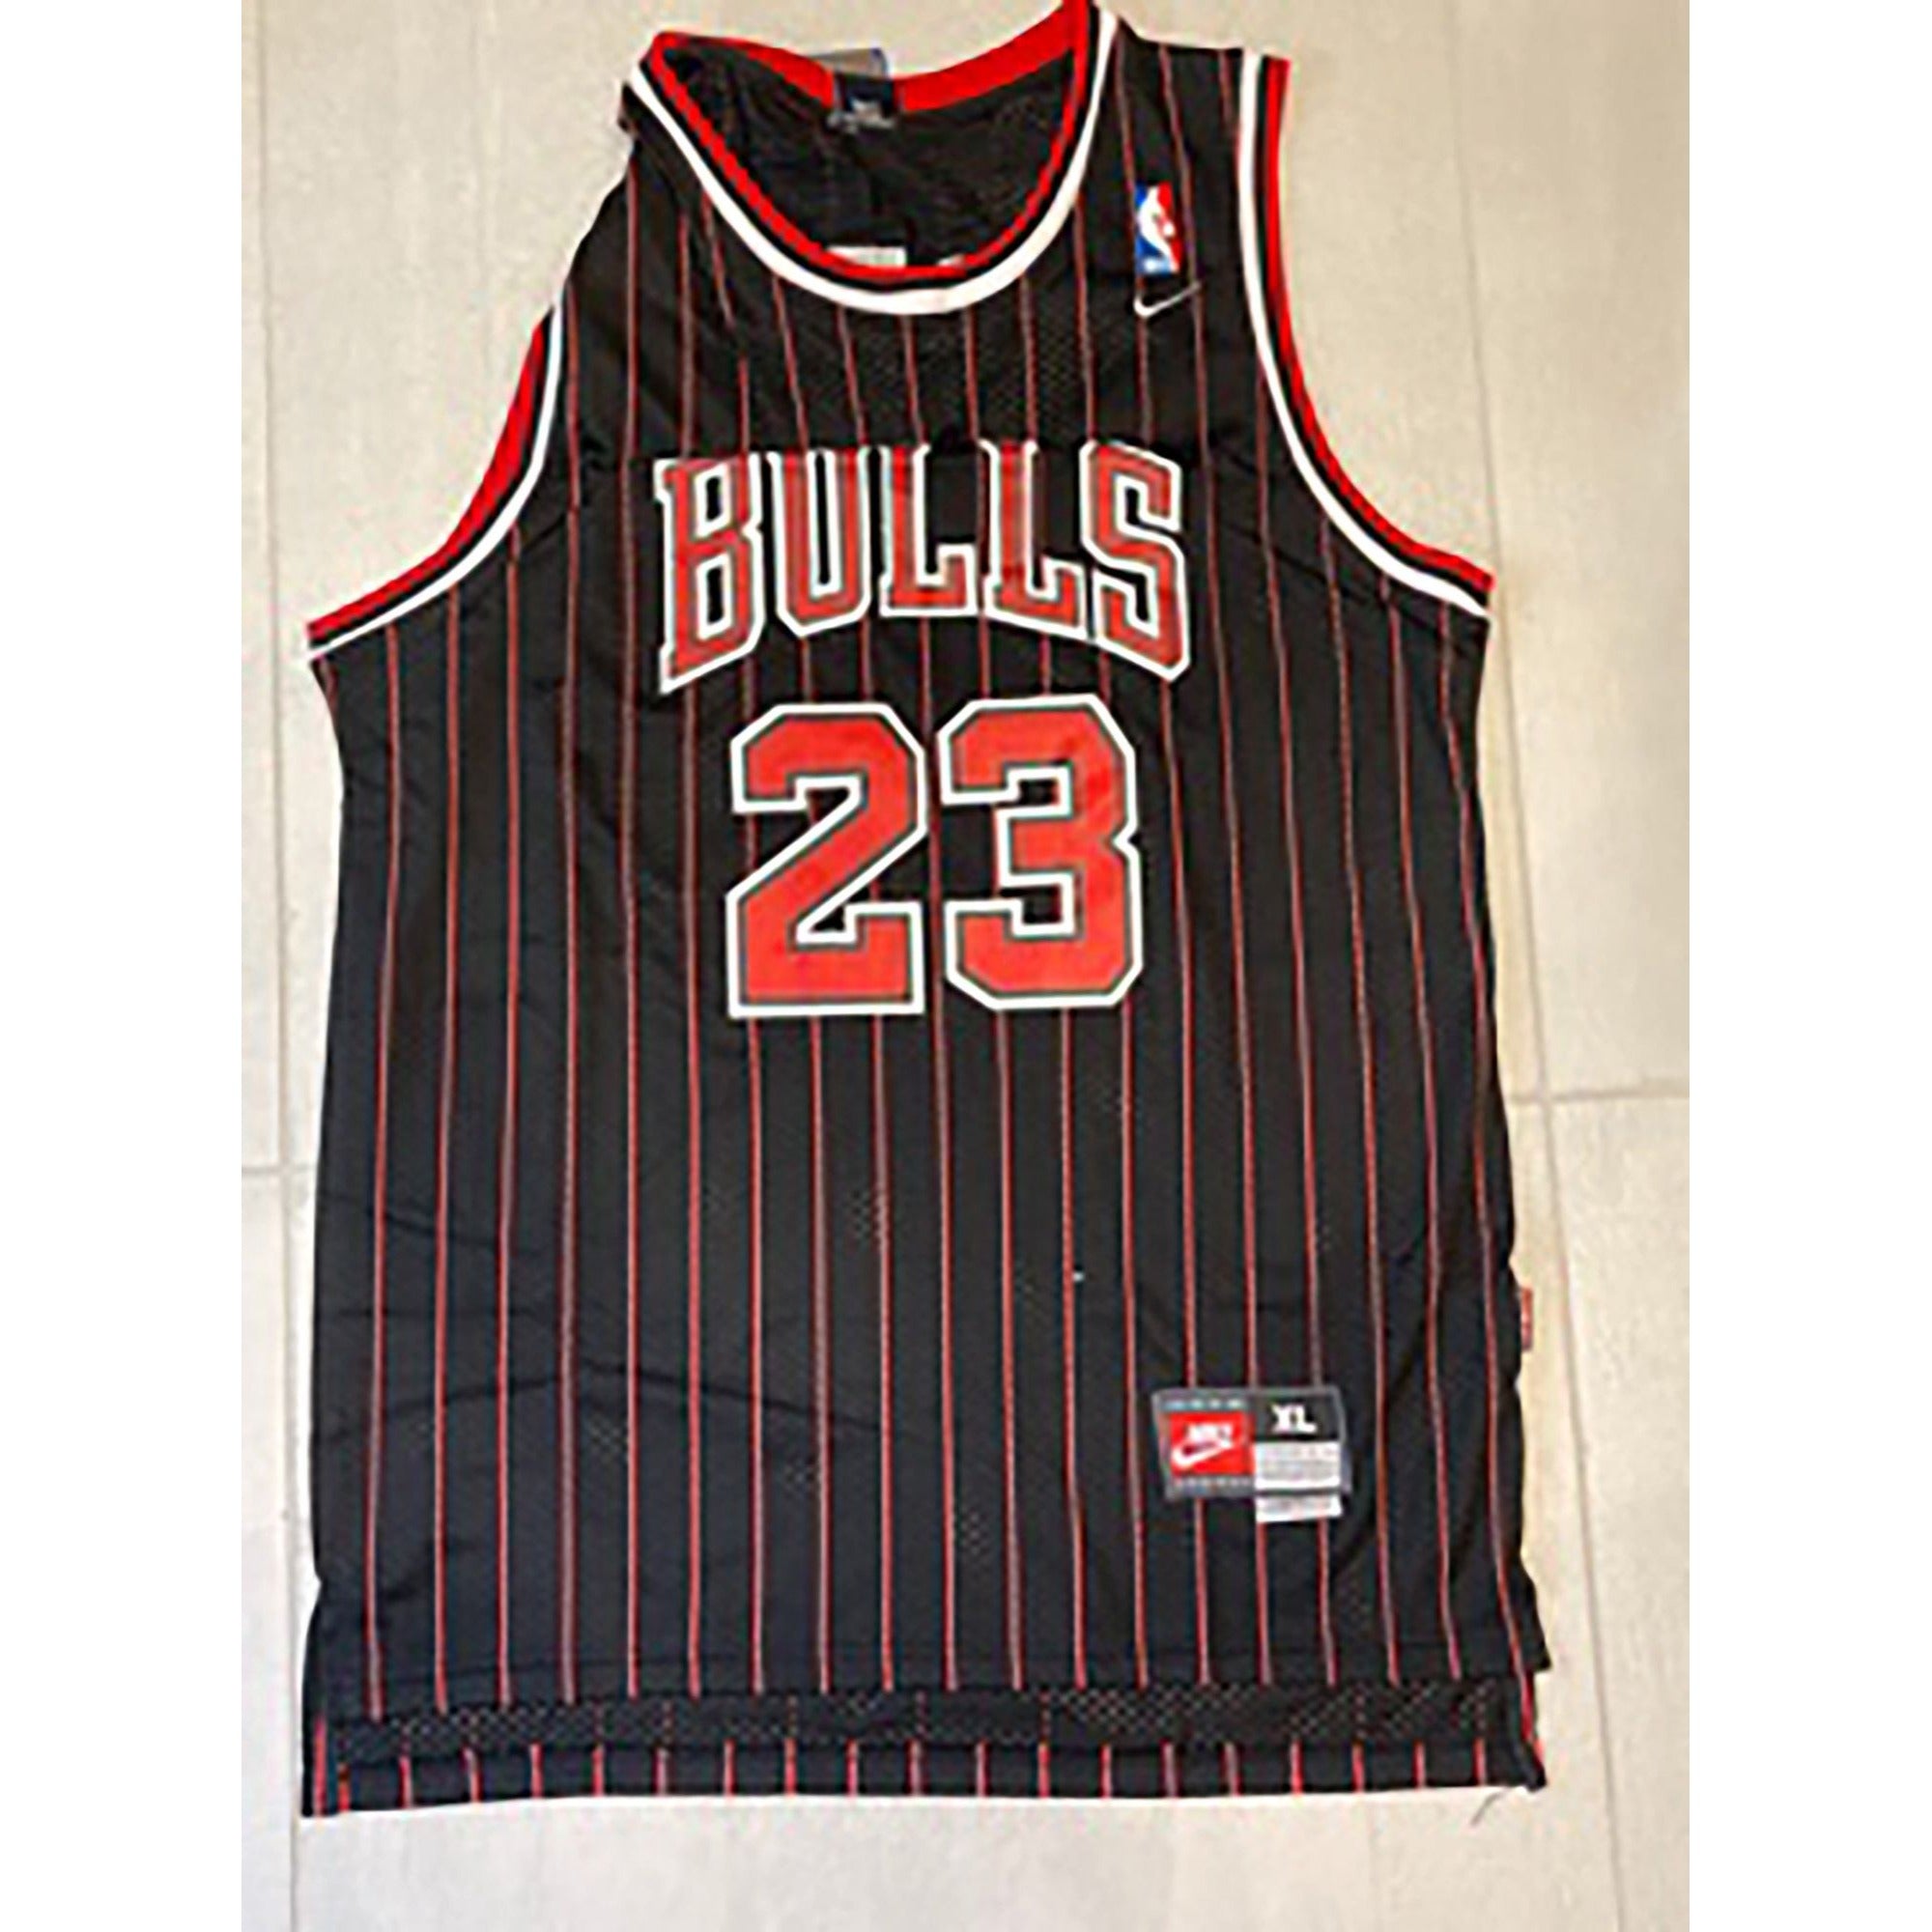 Michael Jordan black jersey signed with proof